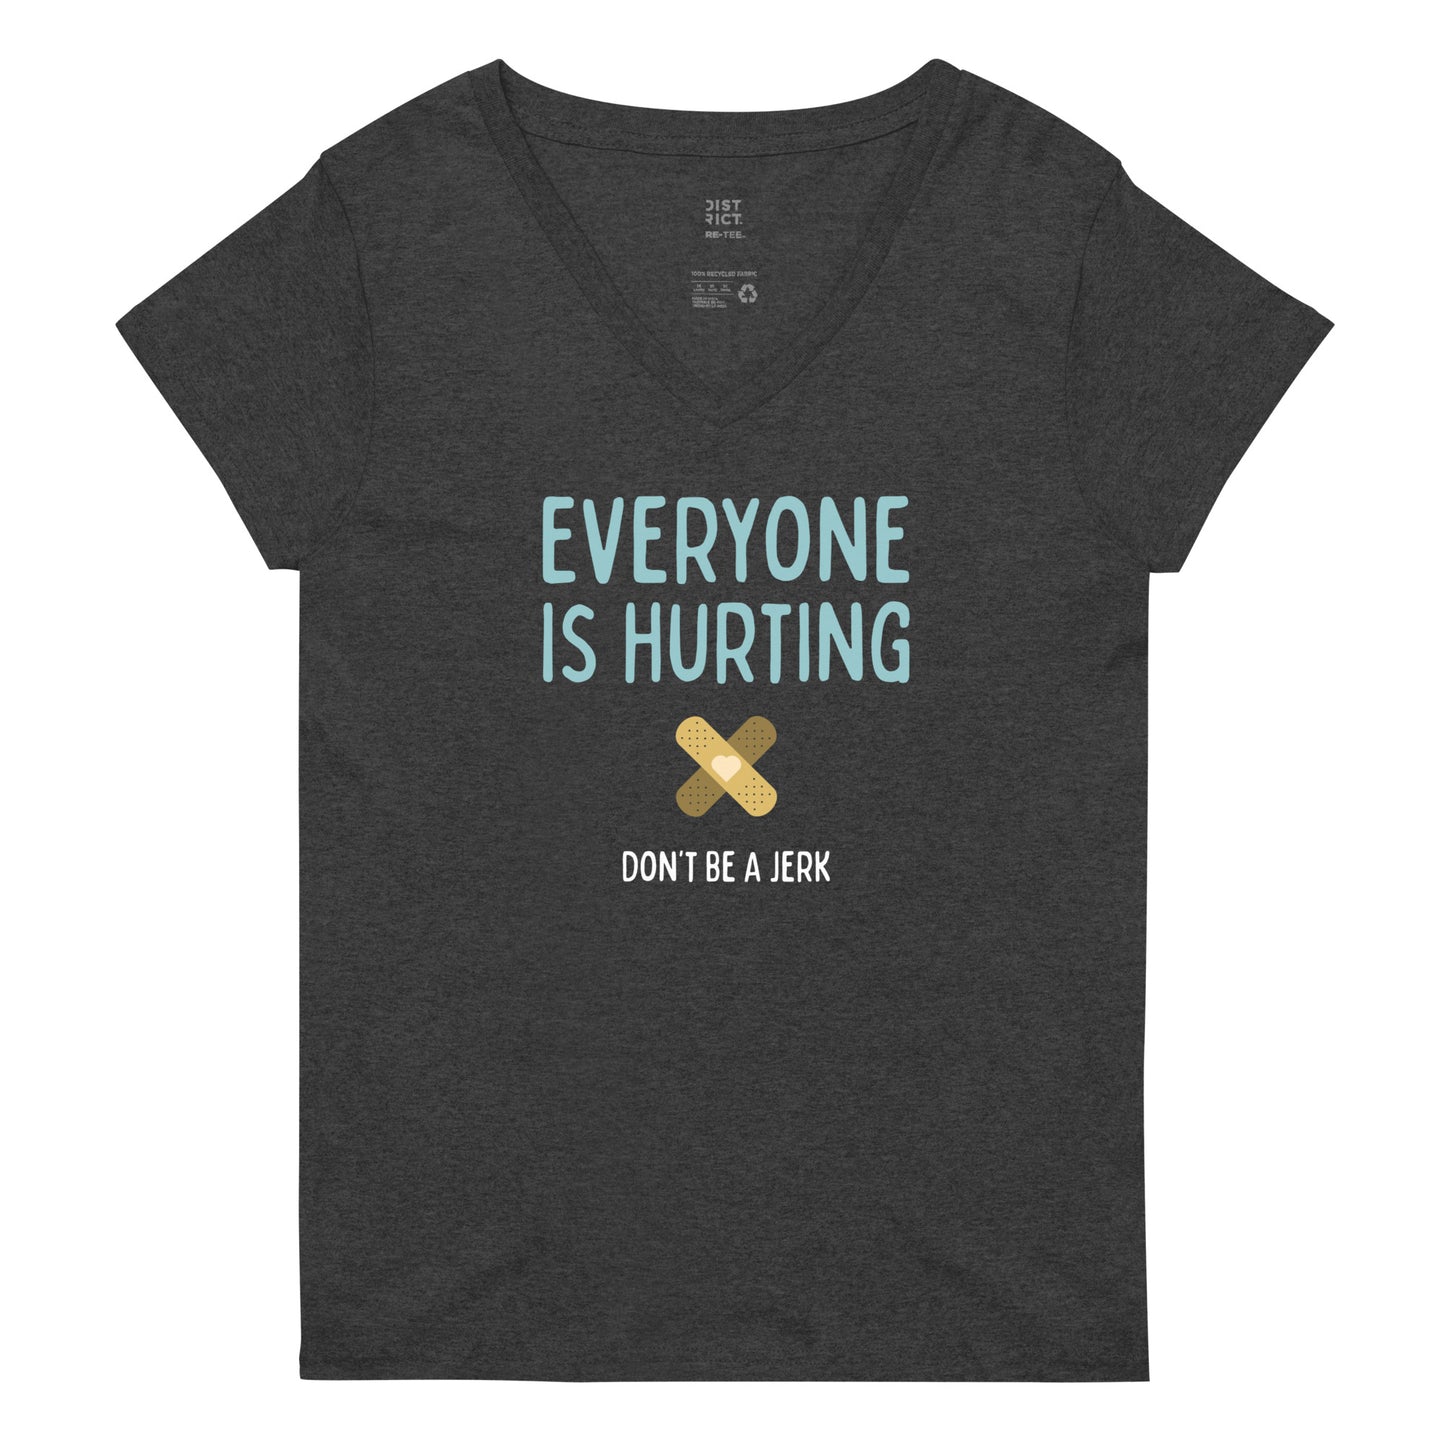 Everyone Is Hurting - Women’s V-Neck Tee